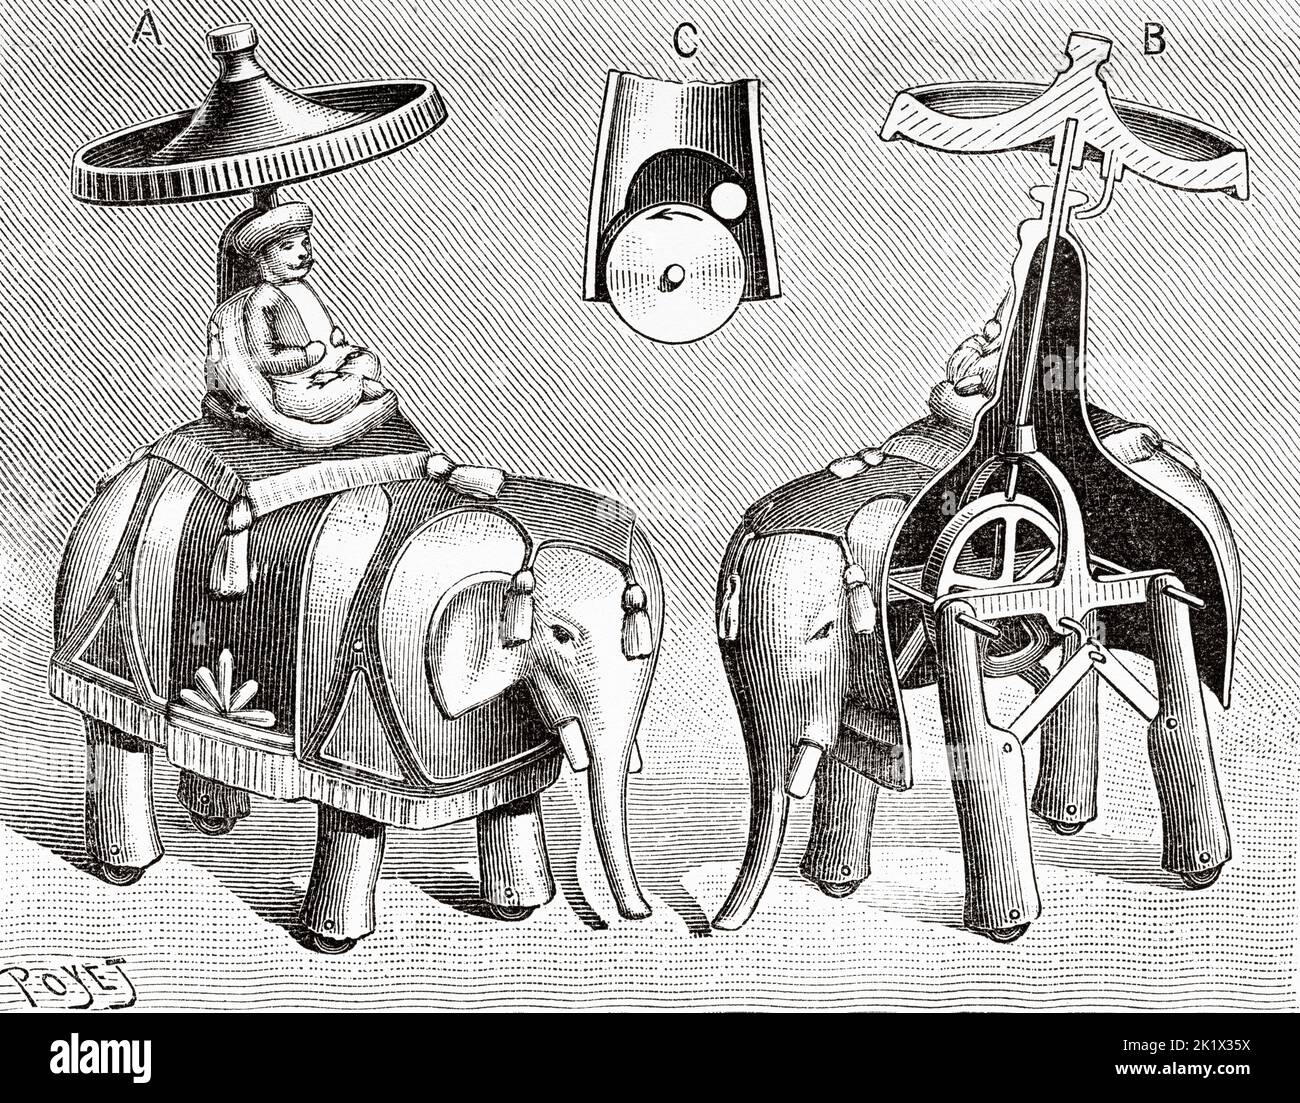 The mechanical elephant of the late 19th century. Old 19th century engraved illustration from La Nature 1890 Stock Photo